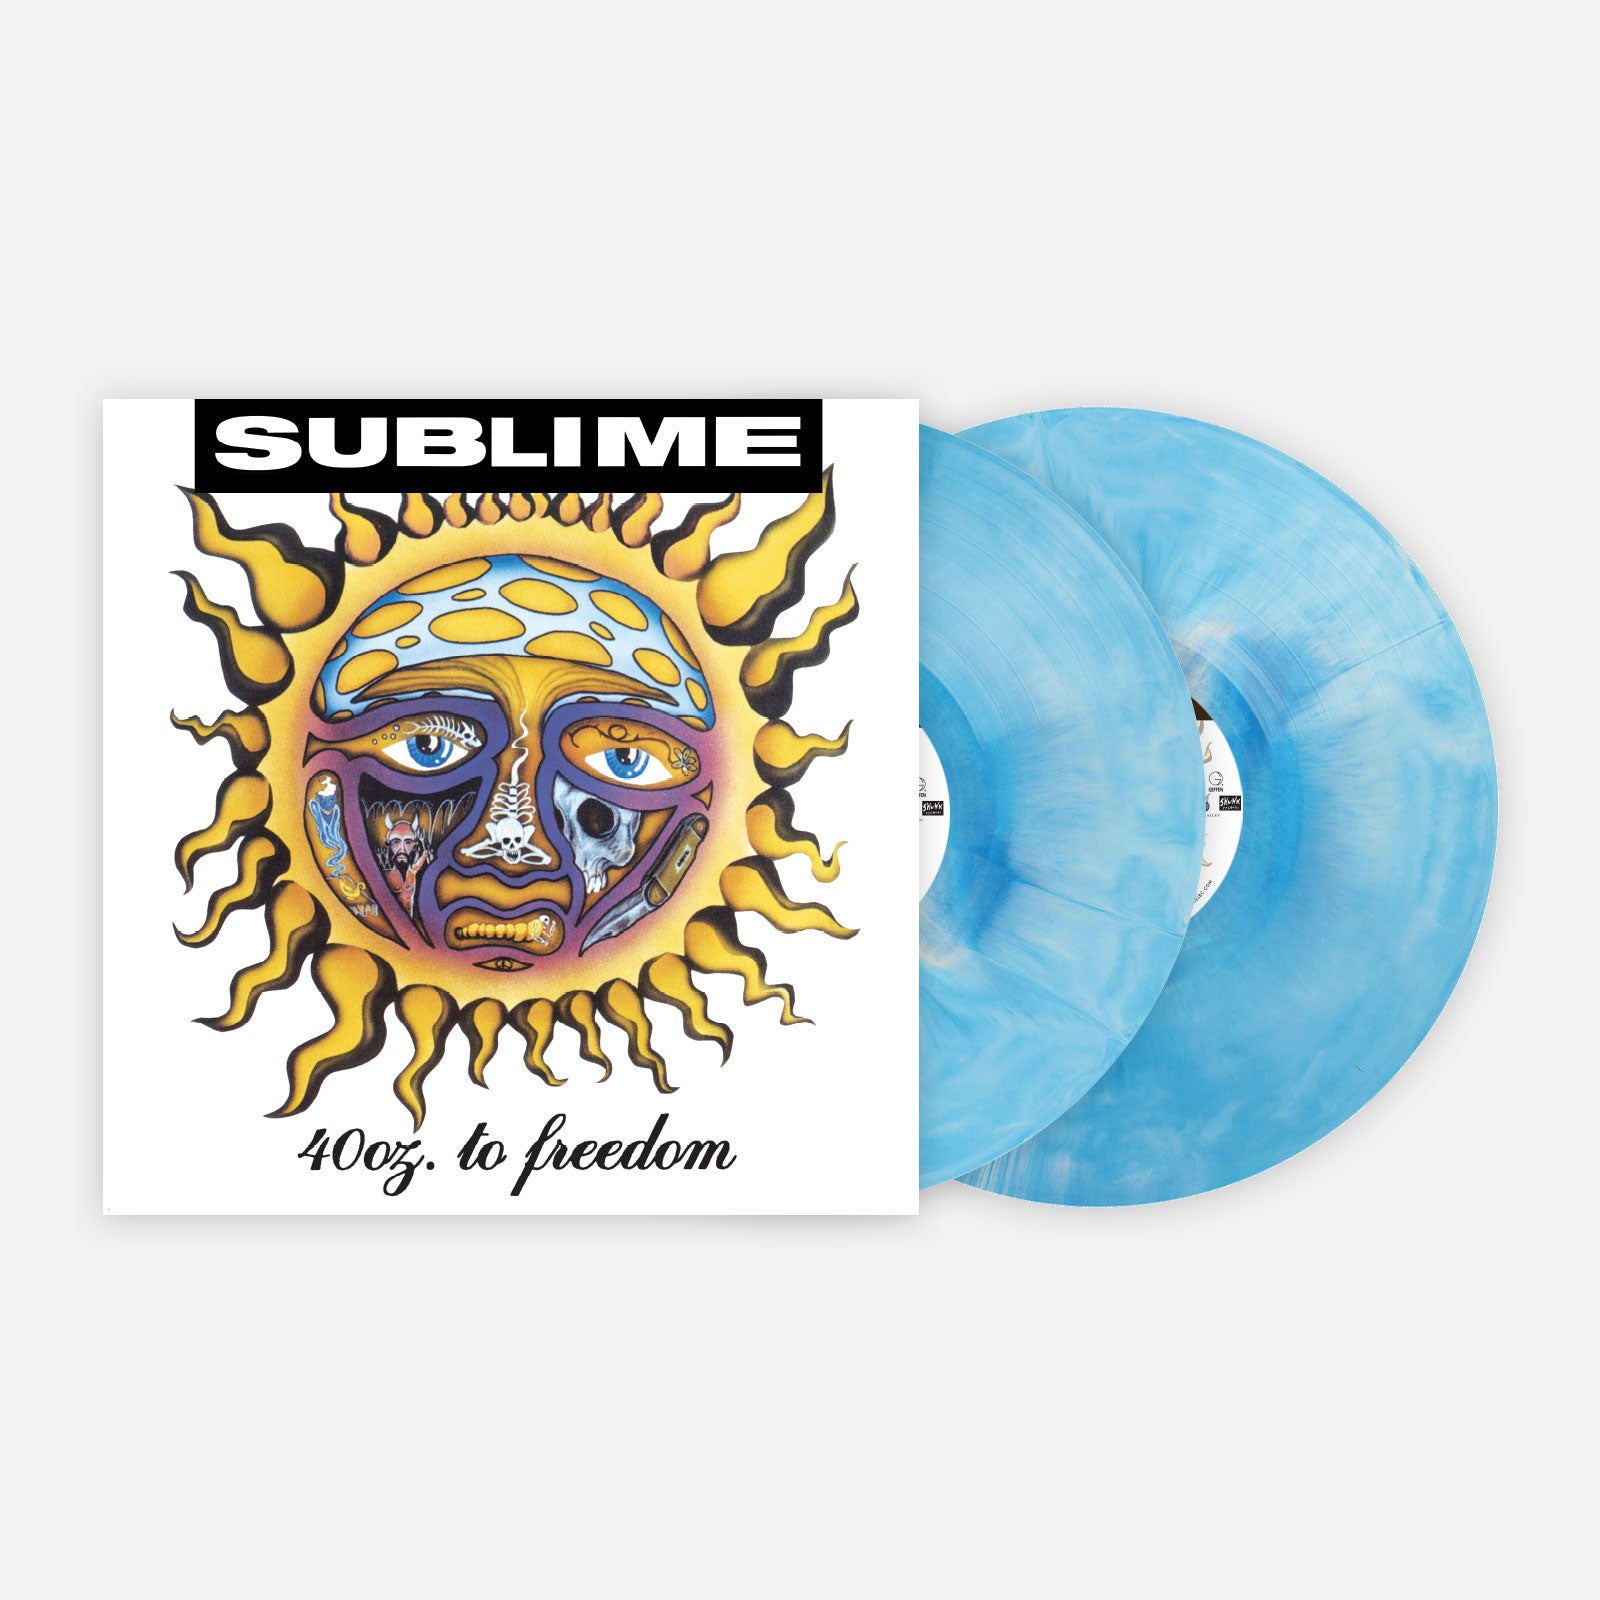 Out In The Wild - Sublime